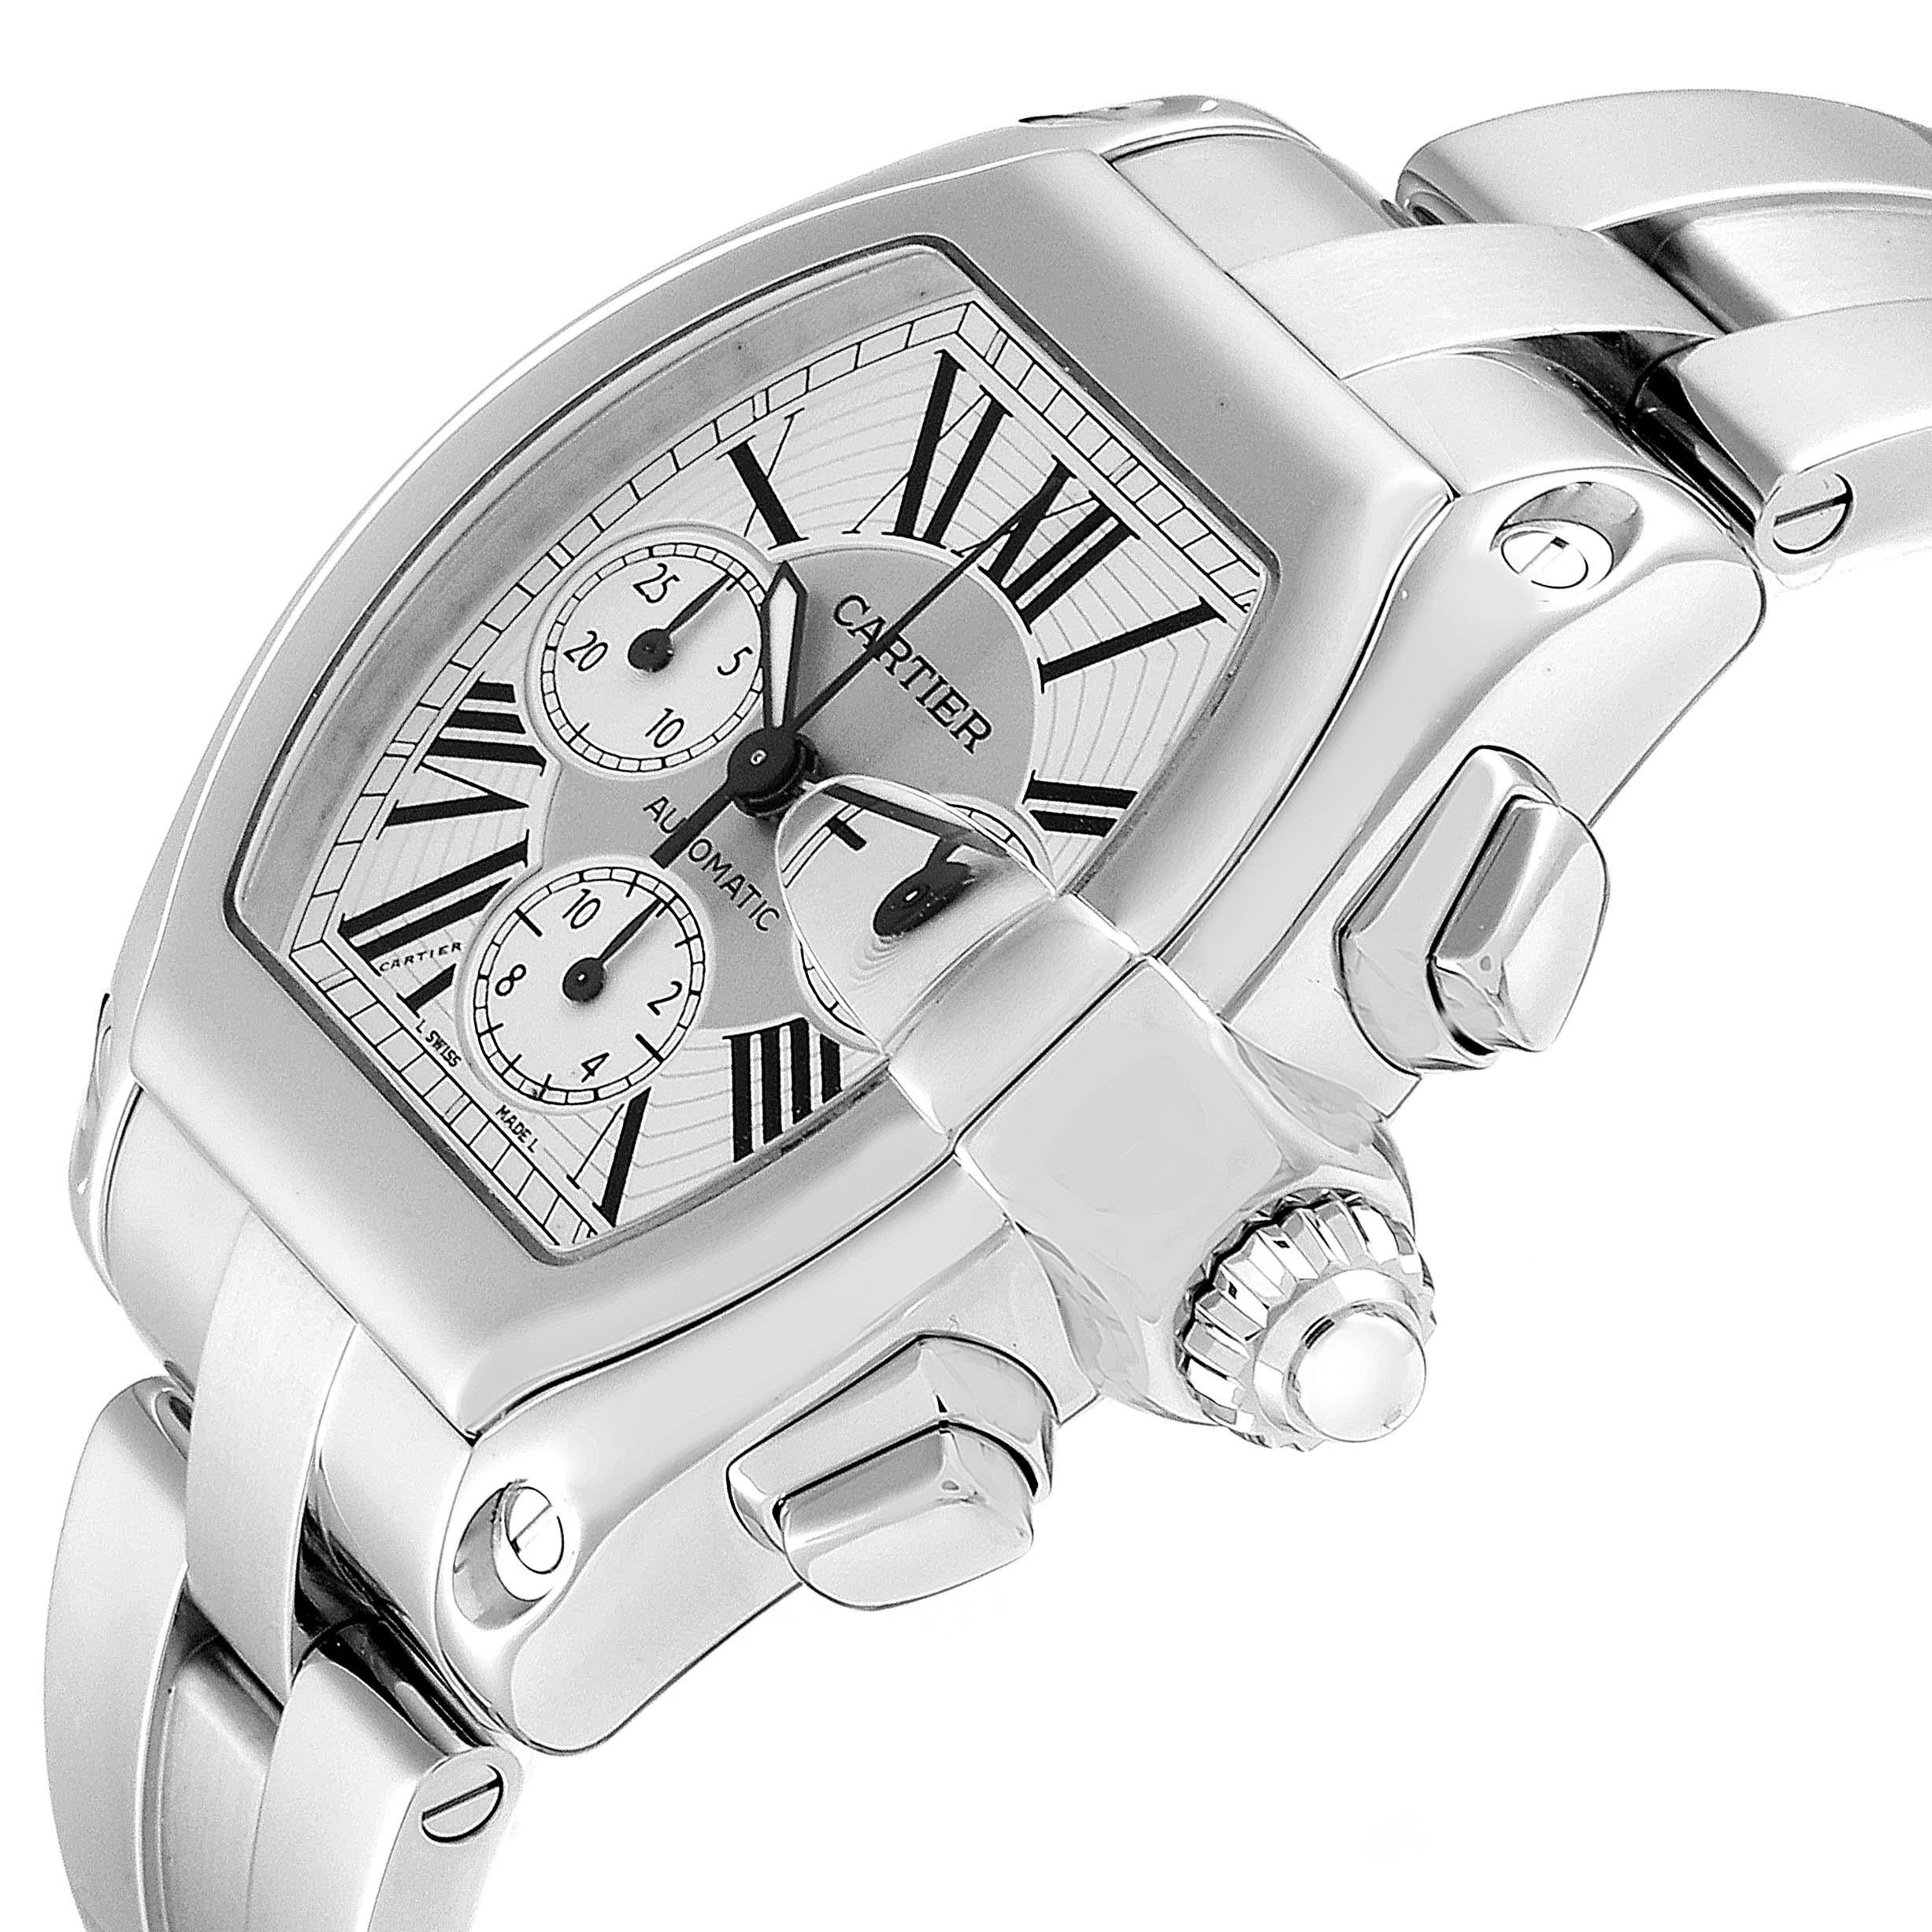 Cartier Roadster XL Chronograph Automatic Men's Watch W62019X6 Box For Sale 2